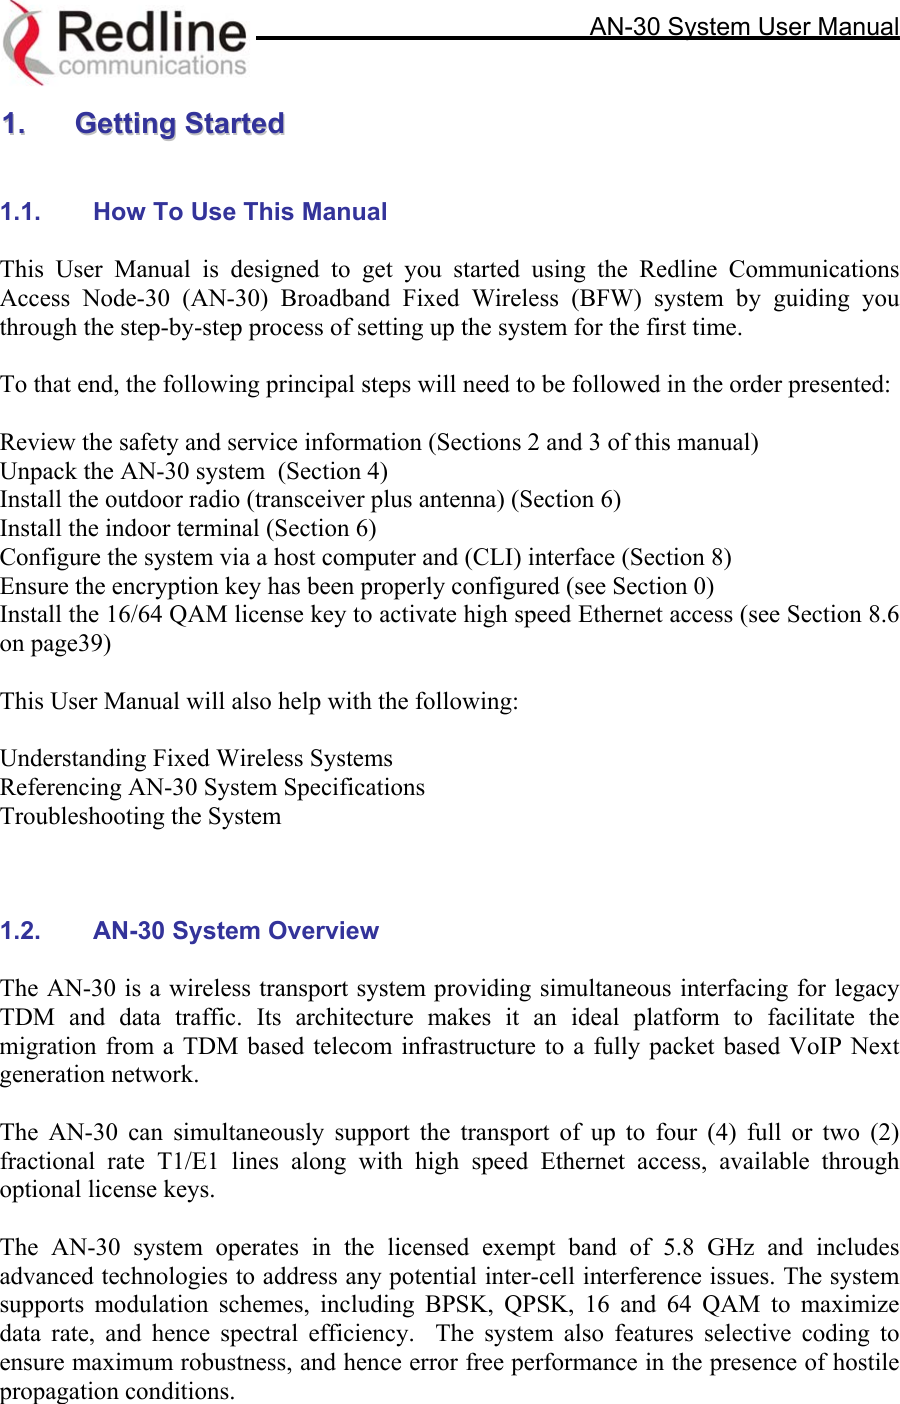     AN-30 System User Manual  11..  GGeettttiinngg  SSttaarrtteedd    1.1.  How To Use This Manual  This User Manual is designed to get you started using the Redline Communications Access Node-30 (AN-30) Broadband Fixed Wireless (BFW) system by guiding you through the step-by-step process of setting up the system for the first time.   To that end, the following principal steps will need to be followed in the order presented:  Review the safety and service information (Sections 2 and 3 of this manual) Unpack the AN-30 system  (Section 4) Install the outdoor radio (transceiver plus antenna) (Section 6) Install the indoor terminal (Section 6) Configure the system via a host computer and (CLI) interface (Section 8) Ensure the encryption key has been properly configured (see Section 0) Install the 16/64 QAM license key to activate high speed Ethernet access (see Section 8.6 on page39)  This User Manual will also help with the following:  Understanding Fixed Wireless Systems Referencing AN-30 System Specifications Troubleshooting the System    1.2.  AN-30 System Overview   The AN-30 is a wireless transport system providing simultaneous interfacing for legacy TDM and data traffic. Its architecture makes it an ideal platform to facilitate the migration from a TDM based telecom infrastructure to a fully packet based VoIP Next generation network.   The AN-30 can simultaneously support the transport of up to four (4) full or two (2) fractional rate T1/E1 lines along with high speed Ethernet access, available through optional license keys.    The AN-30 system operates in the licensed exempt band of 5.8 GHz and includes advanced technologies to address any potential inter-cell interference issues. The system supports modulation schemes, including BPSK, QPSK, 16 and 64 QAM to maximize data rate, and hence spectral efficiency.  The system also features selective coding to ensure maximum robustness, and hence error free performance in the presence of hostile propagation conditions.   